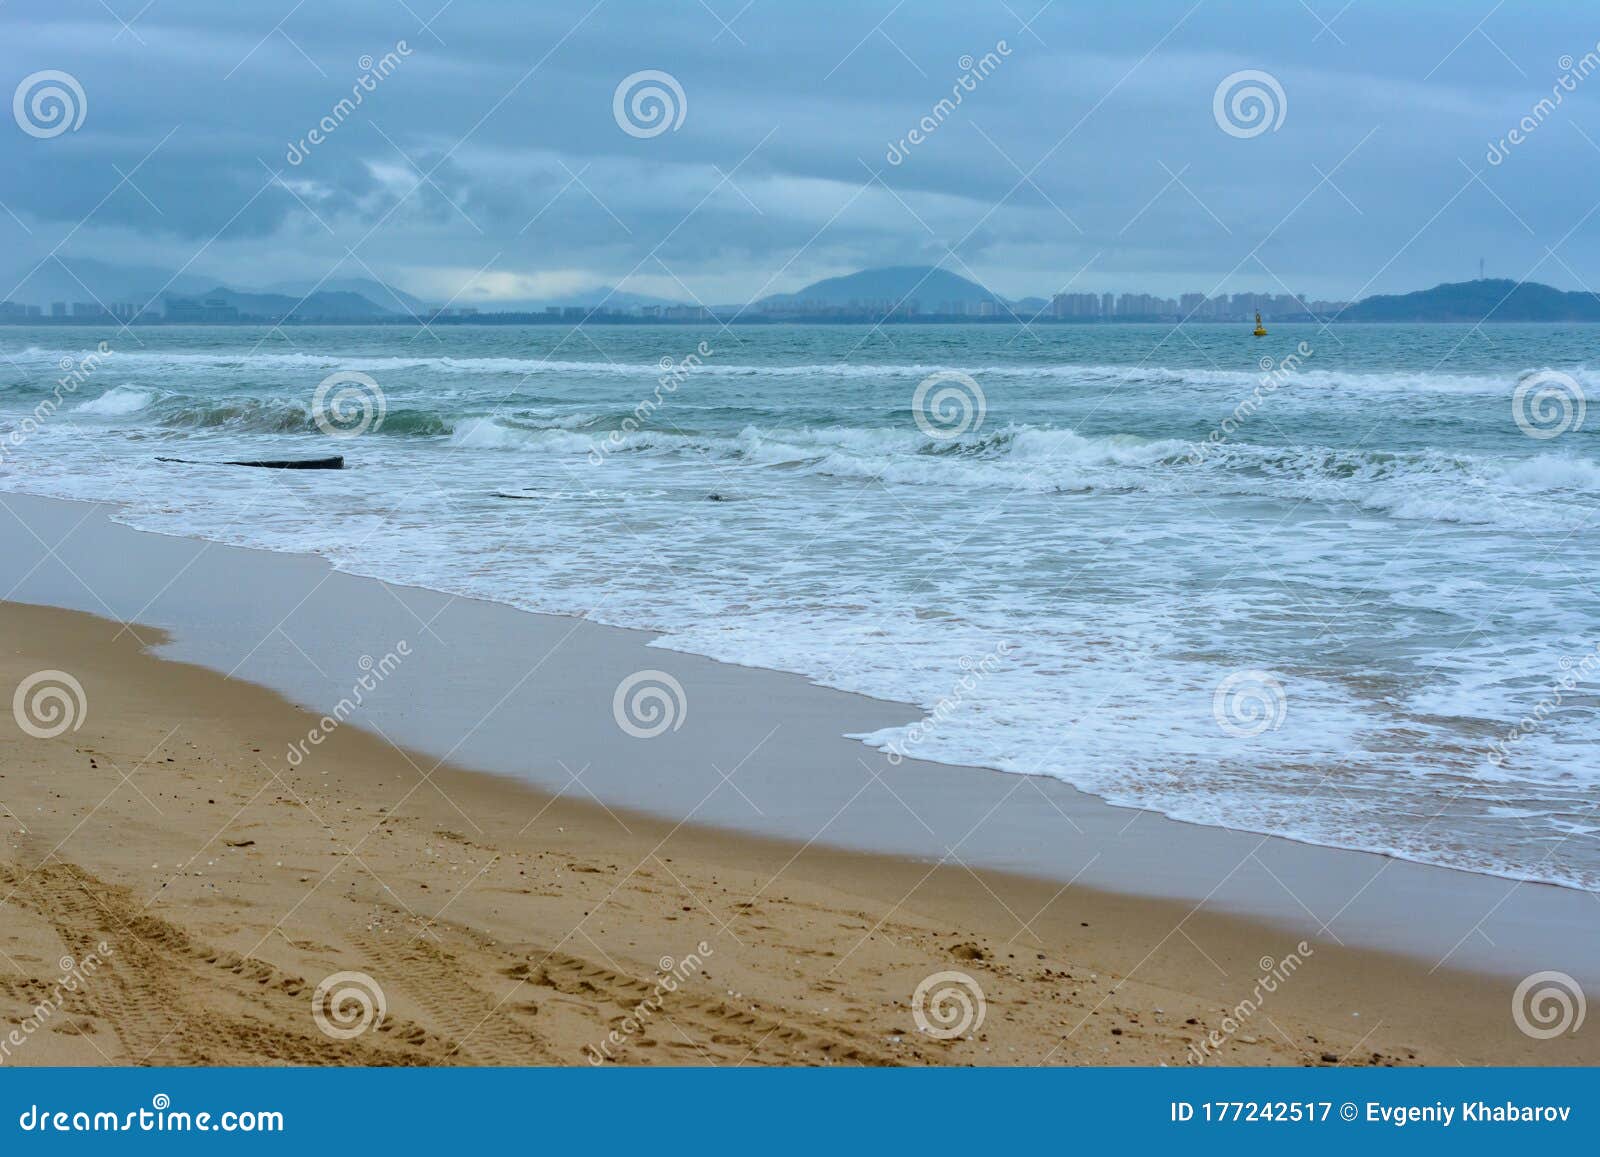 Cloudy Day, Sand Deserted Beach of the Coast of Haitang Bay in South ...